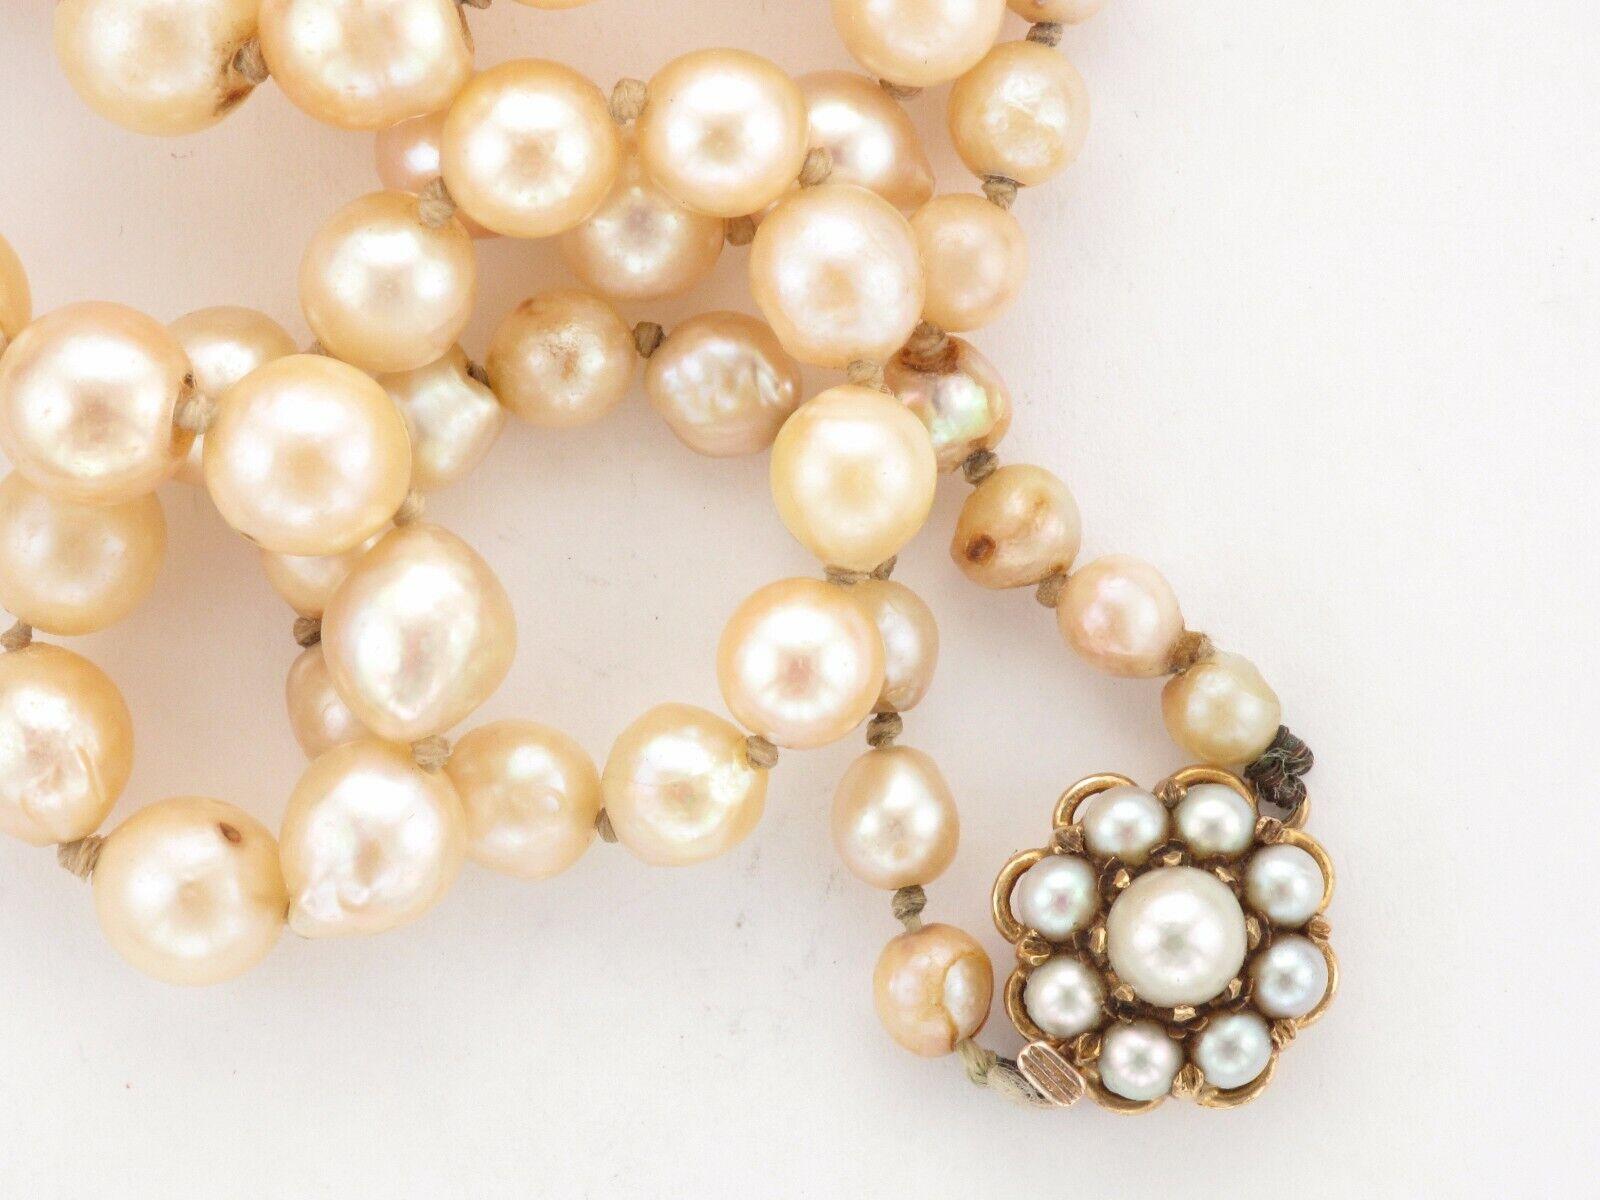 Graduated Pearl Necklace With a 9ct Pearl Clasp

Elegantly crafted with a 9ct Yellow Gold clasp and a graduated string of Pearls, this necklace is a perfect piece to wear to a wedding, a prom or a formal event. The 9ct Gold clasp is a unique and